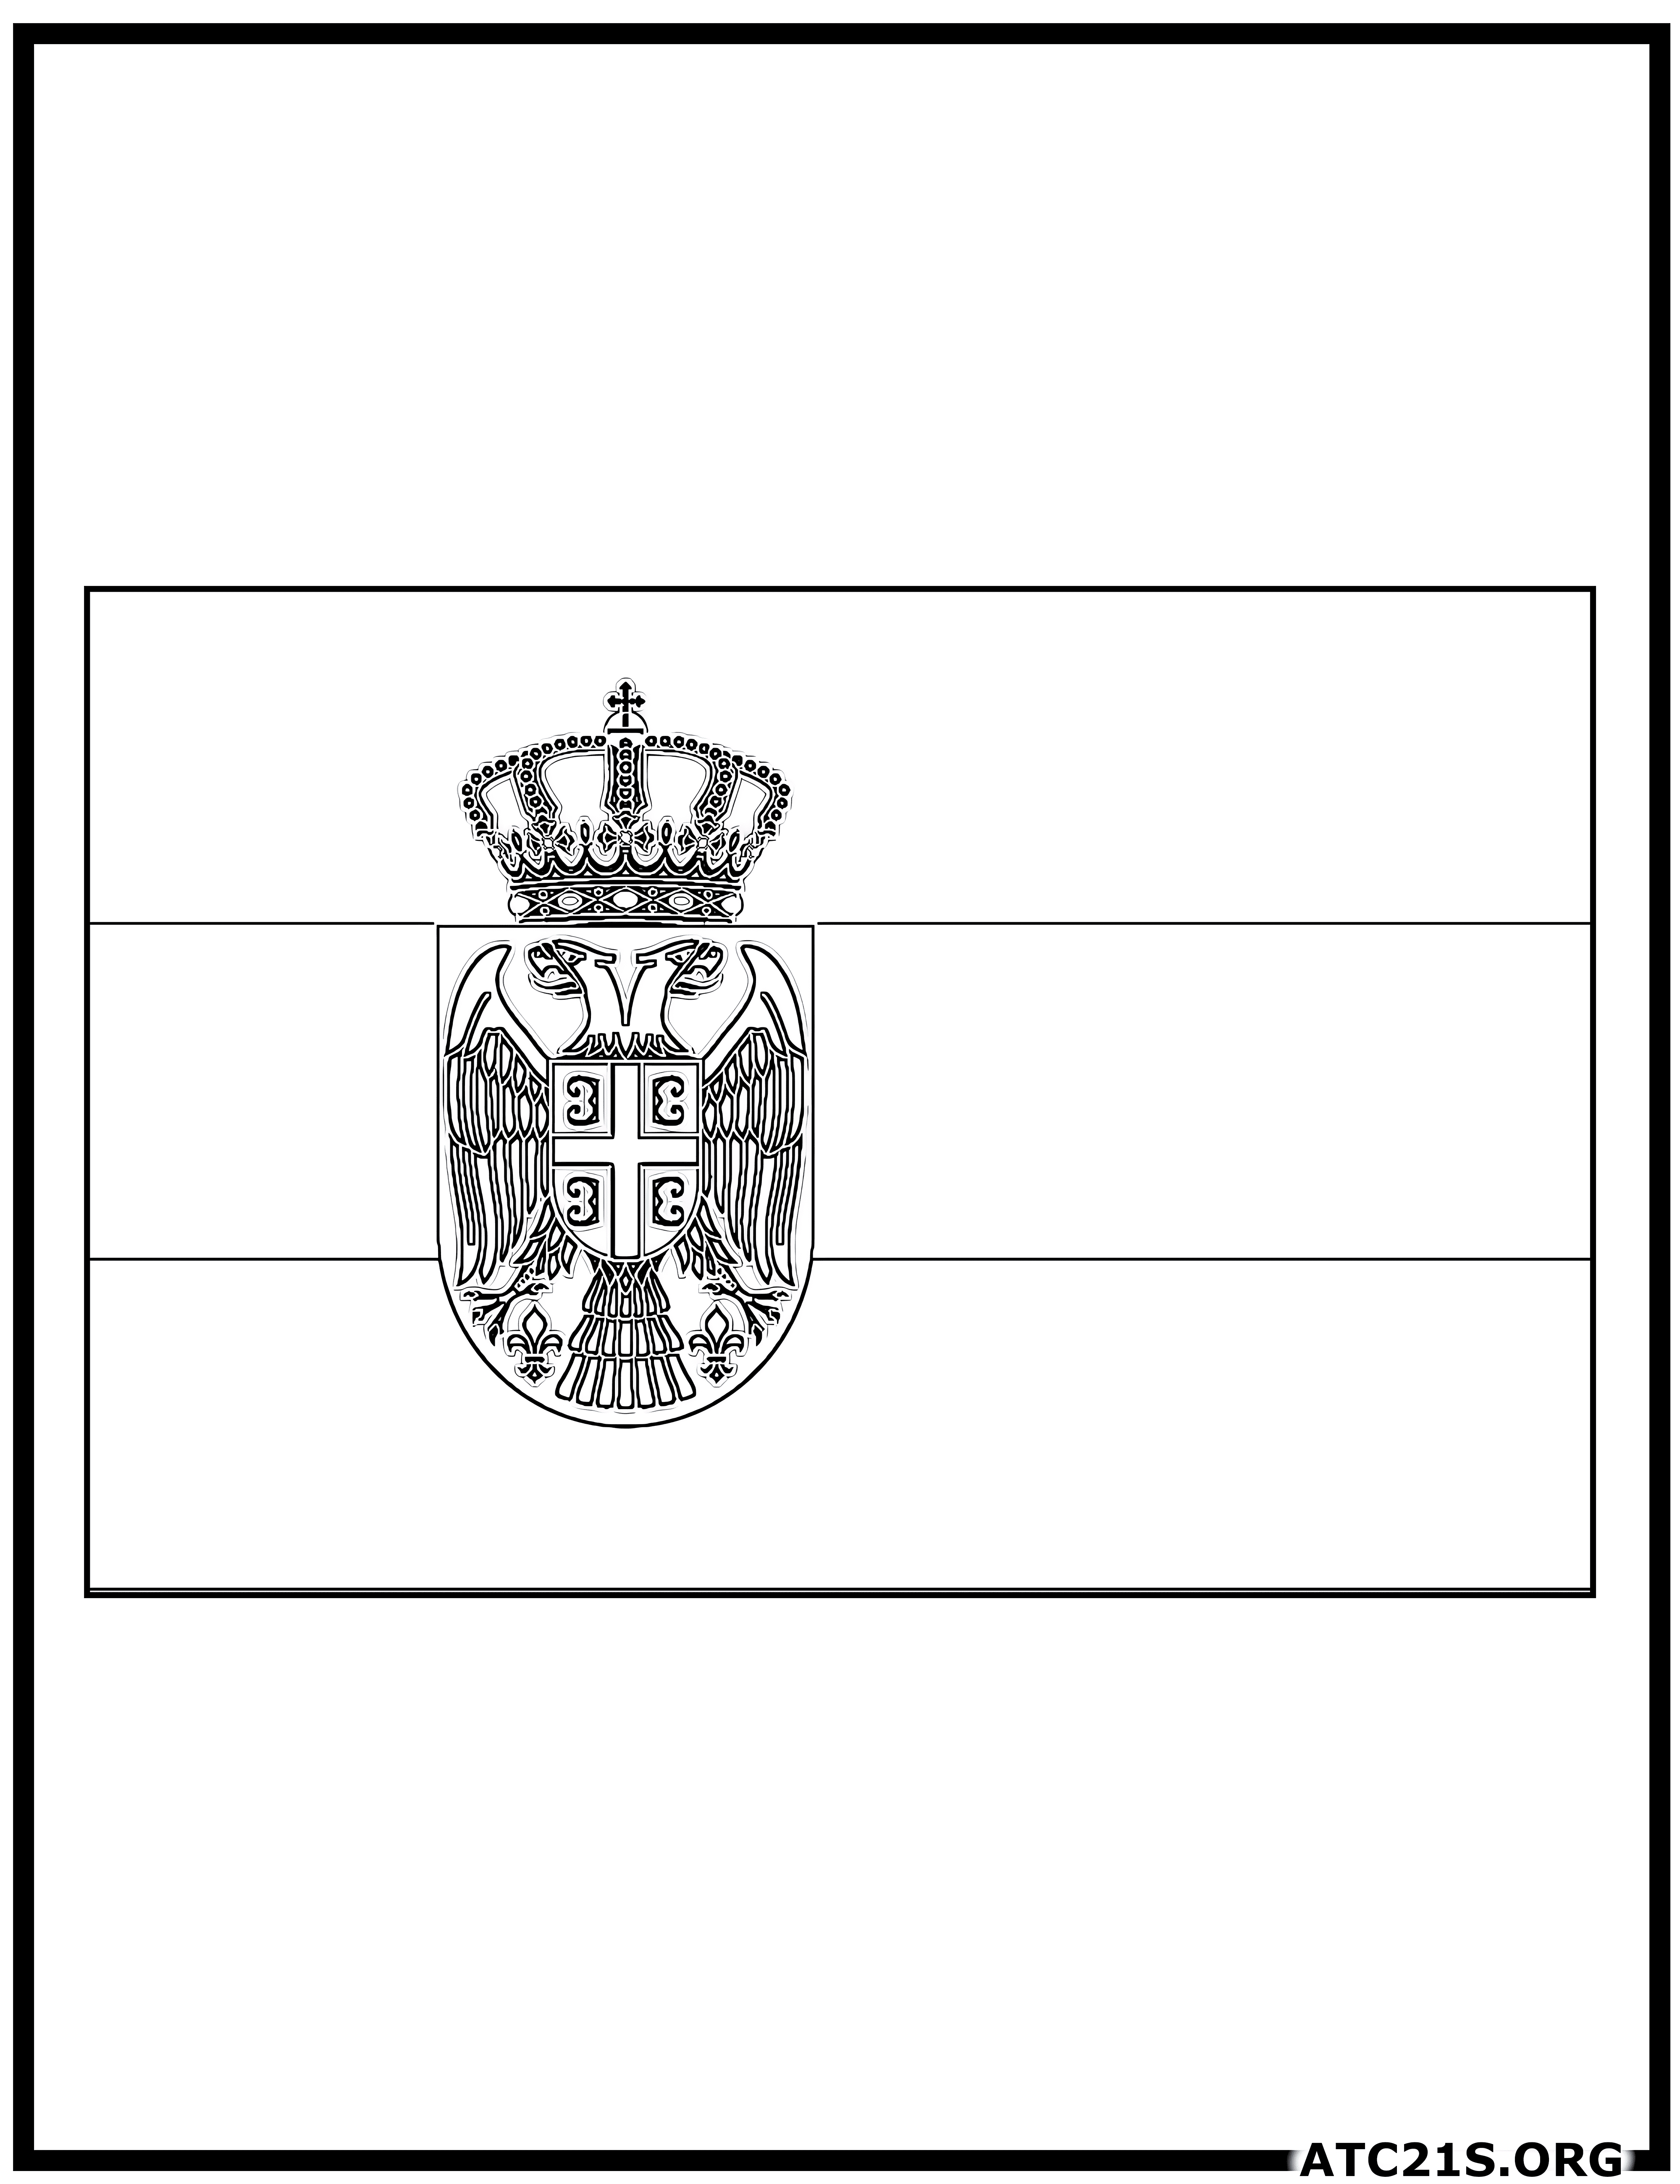 Serbia_flag_coloring_page